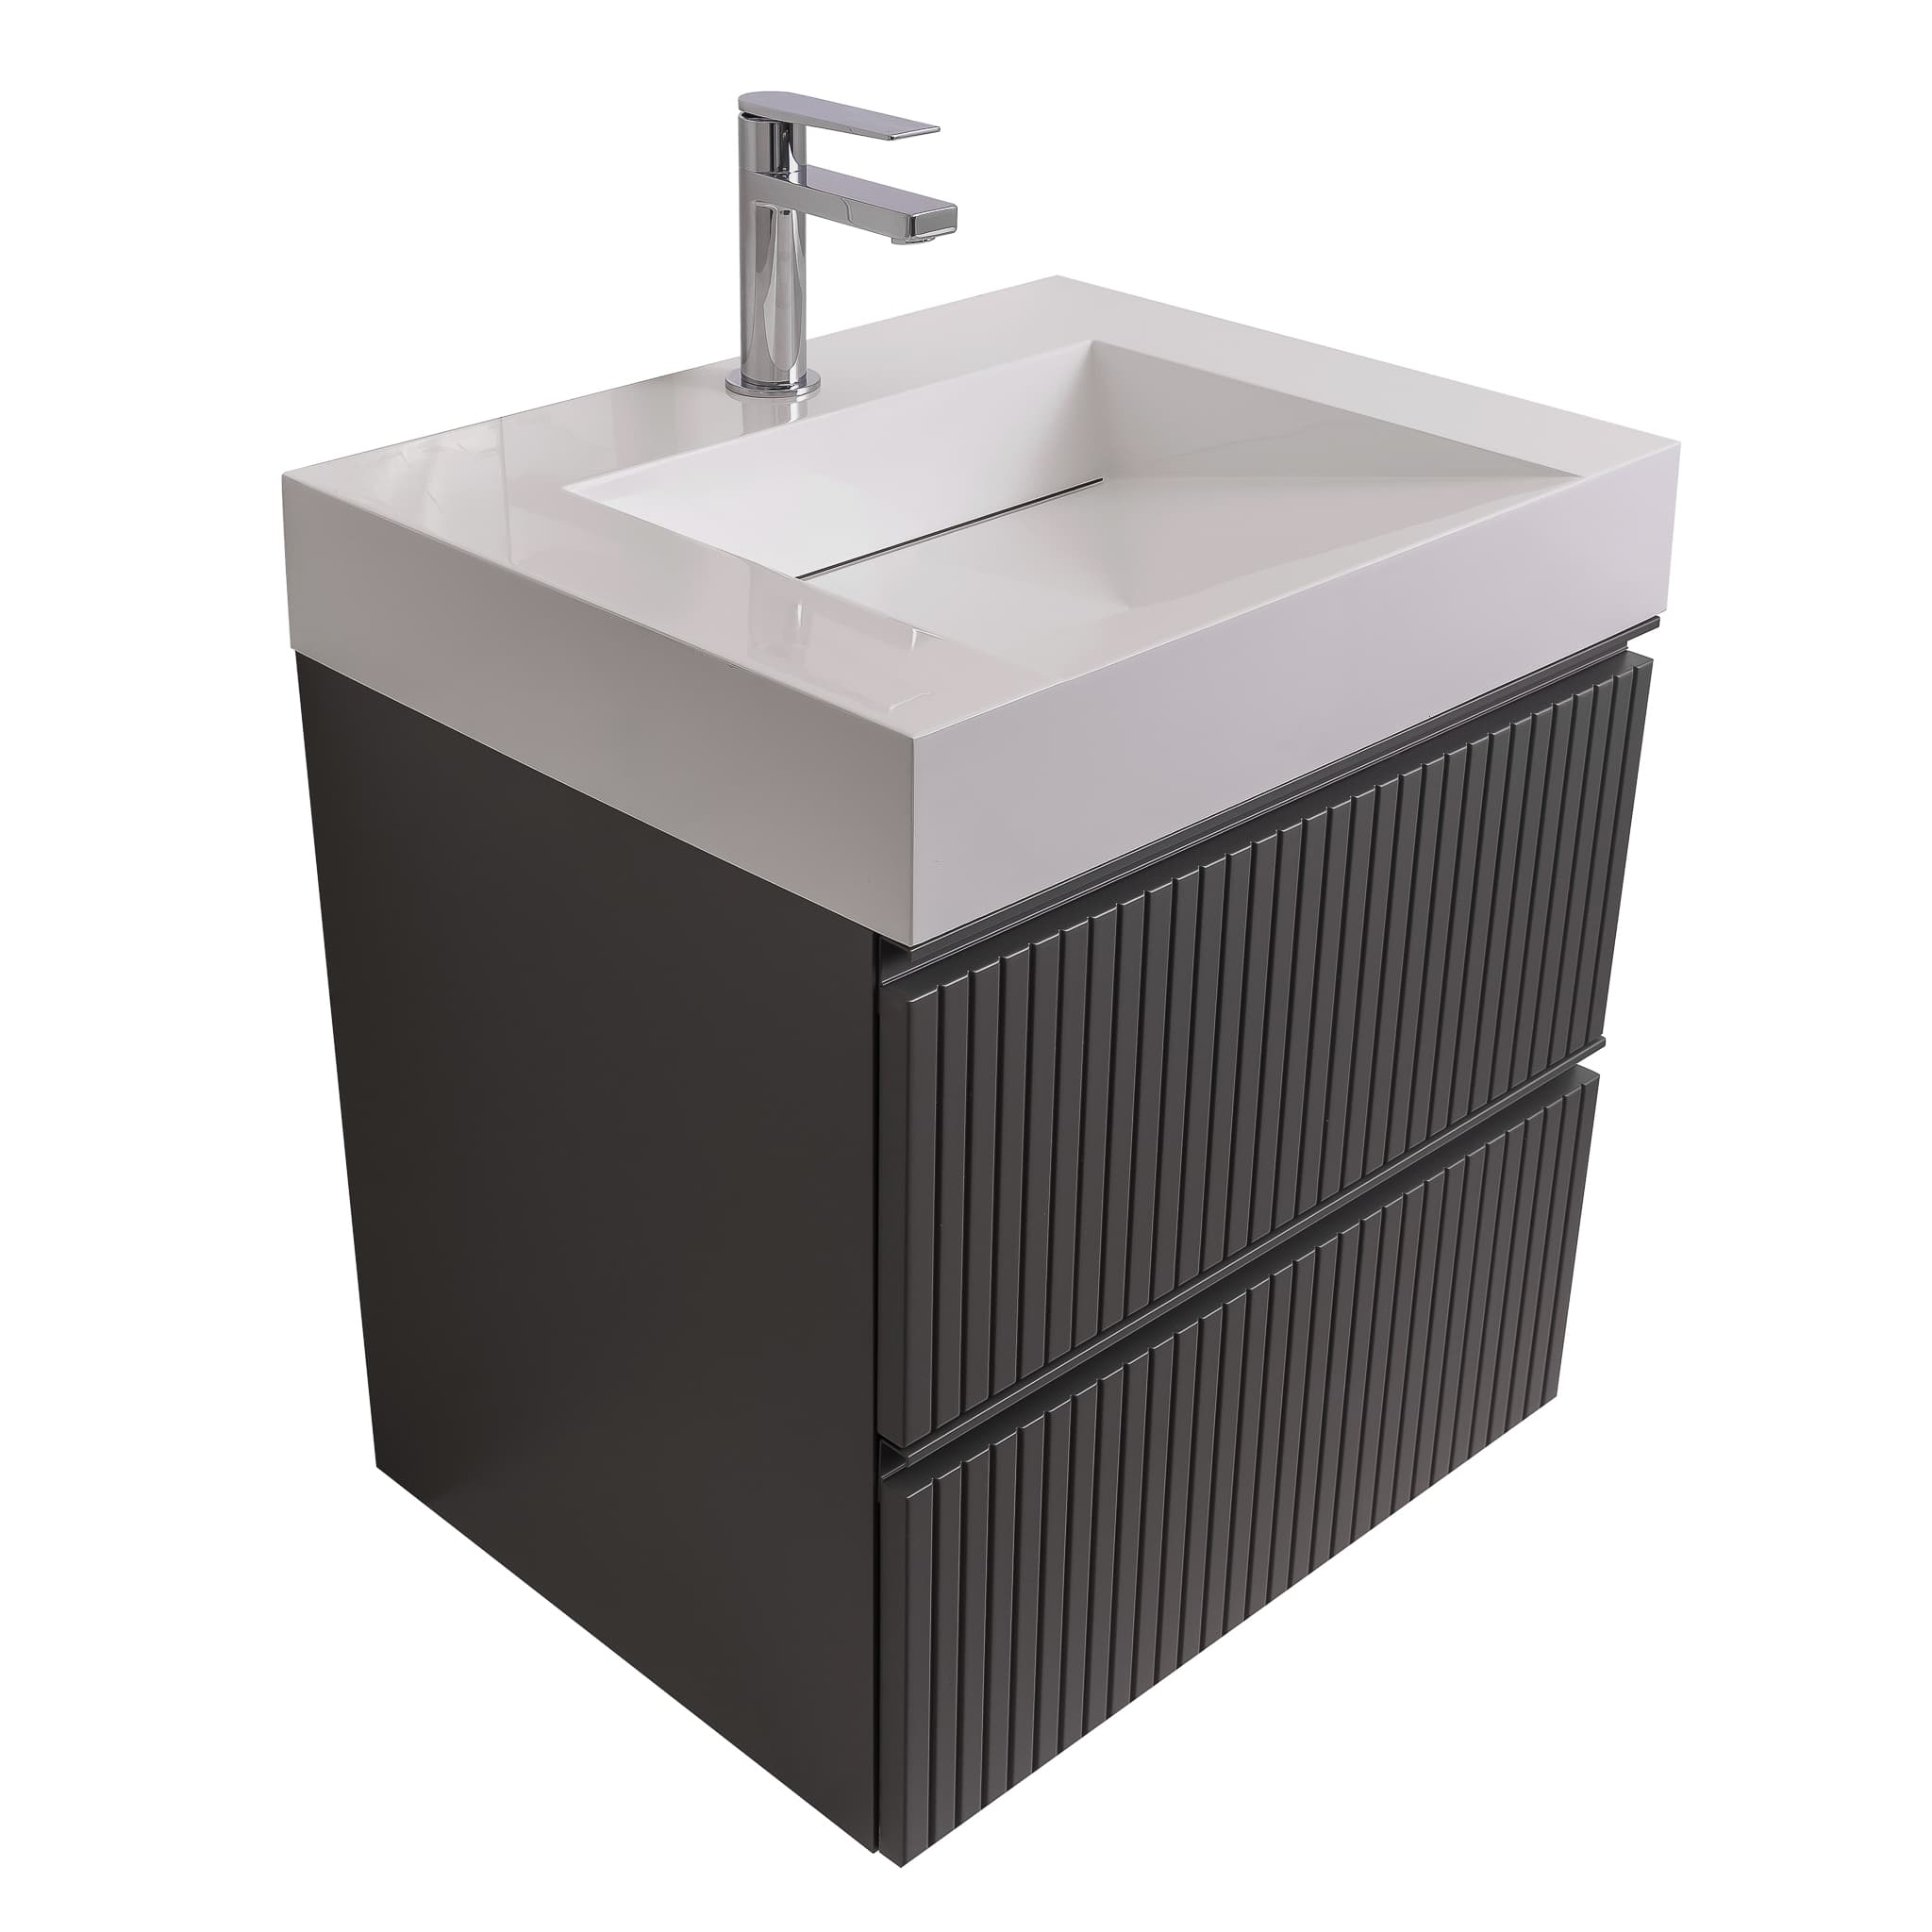 Ares 23.5 Matte Grey Cabinet, Infinity Cultured Marble Sink, Wall Mounted Modern Vanity Set